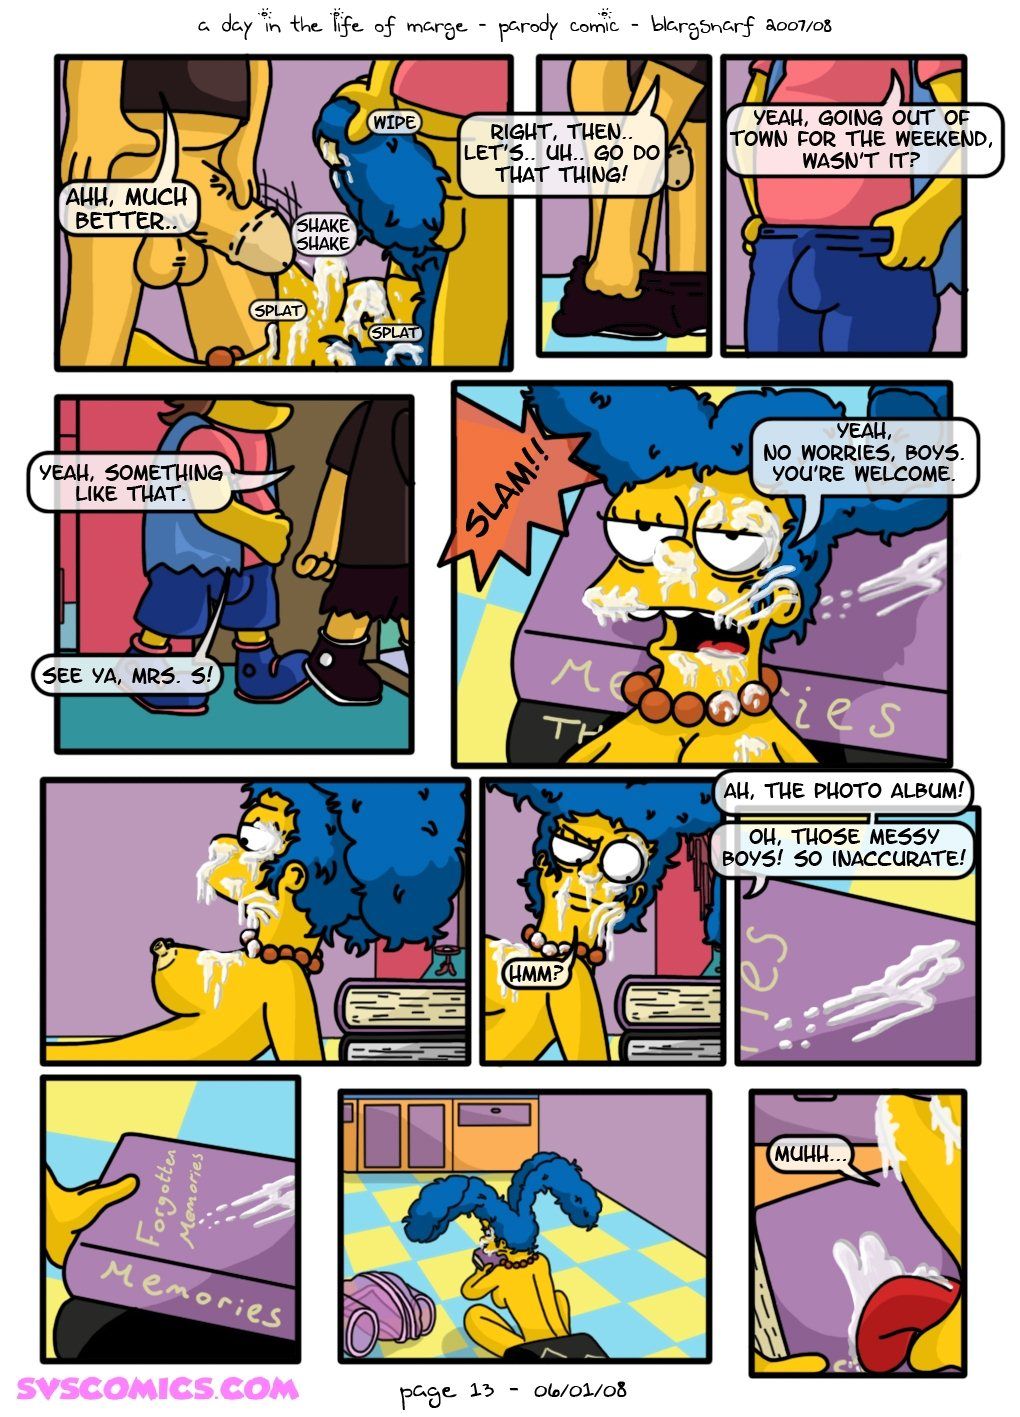 [Blargsnarf] A Day Life of Marge (The Simpsons) page 14